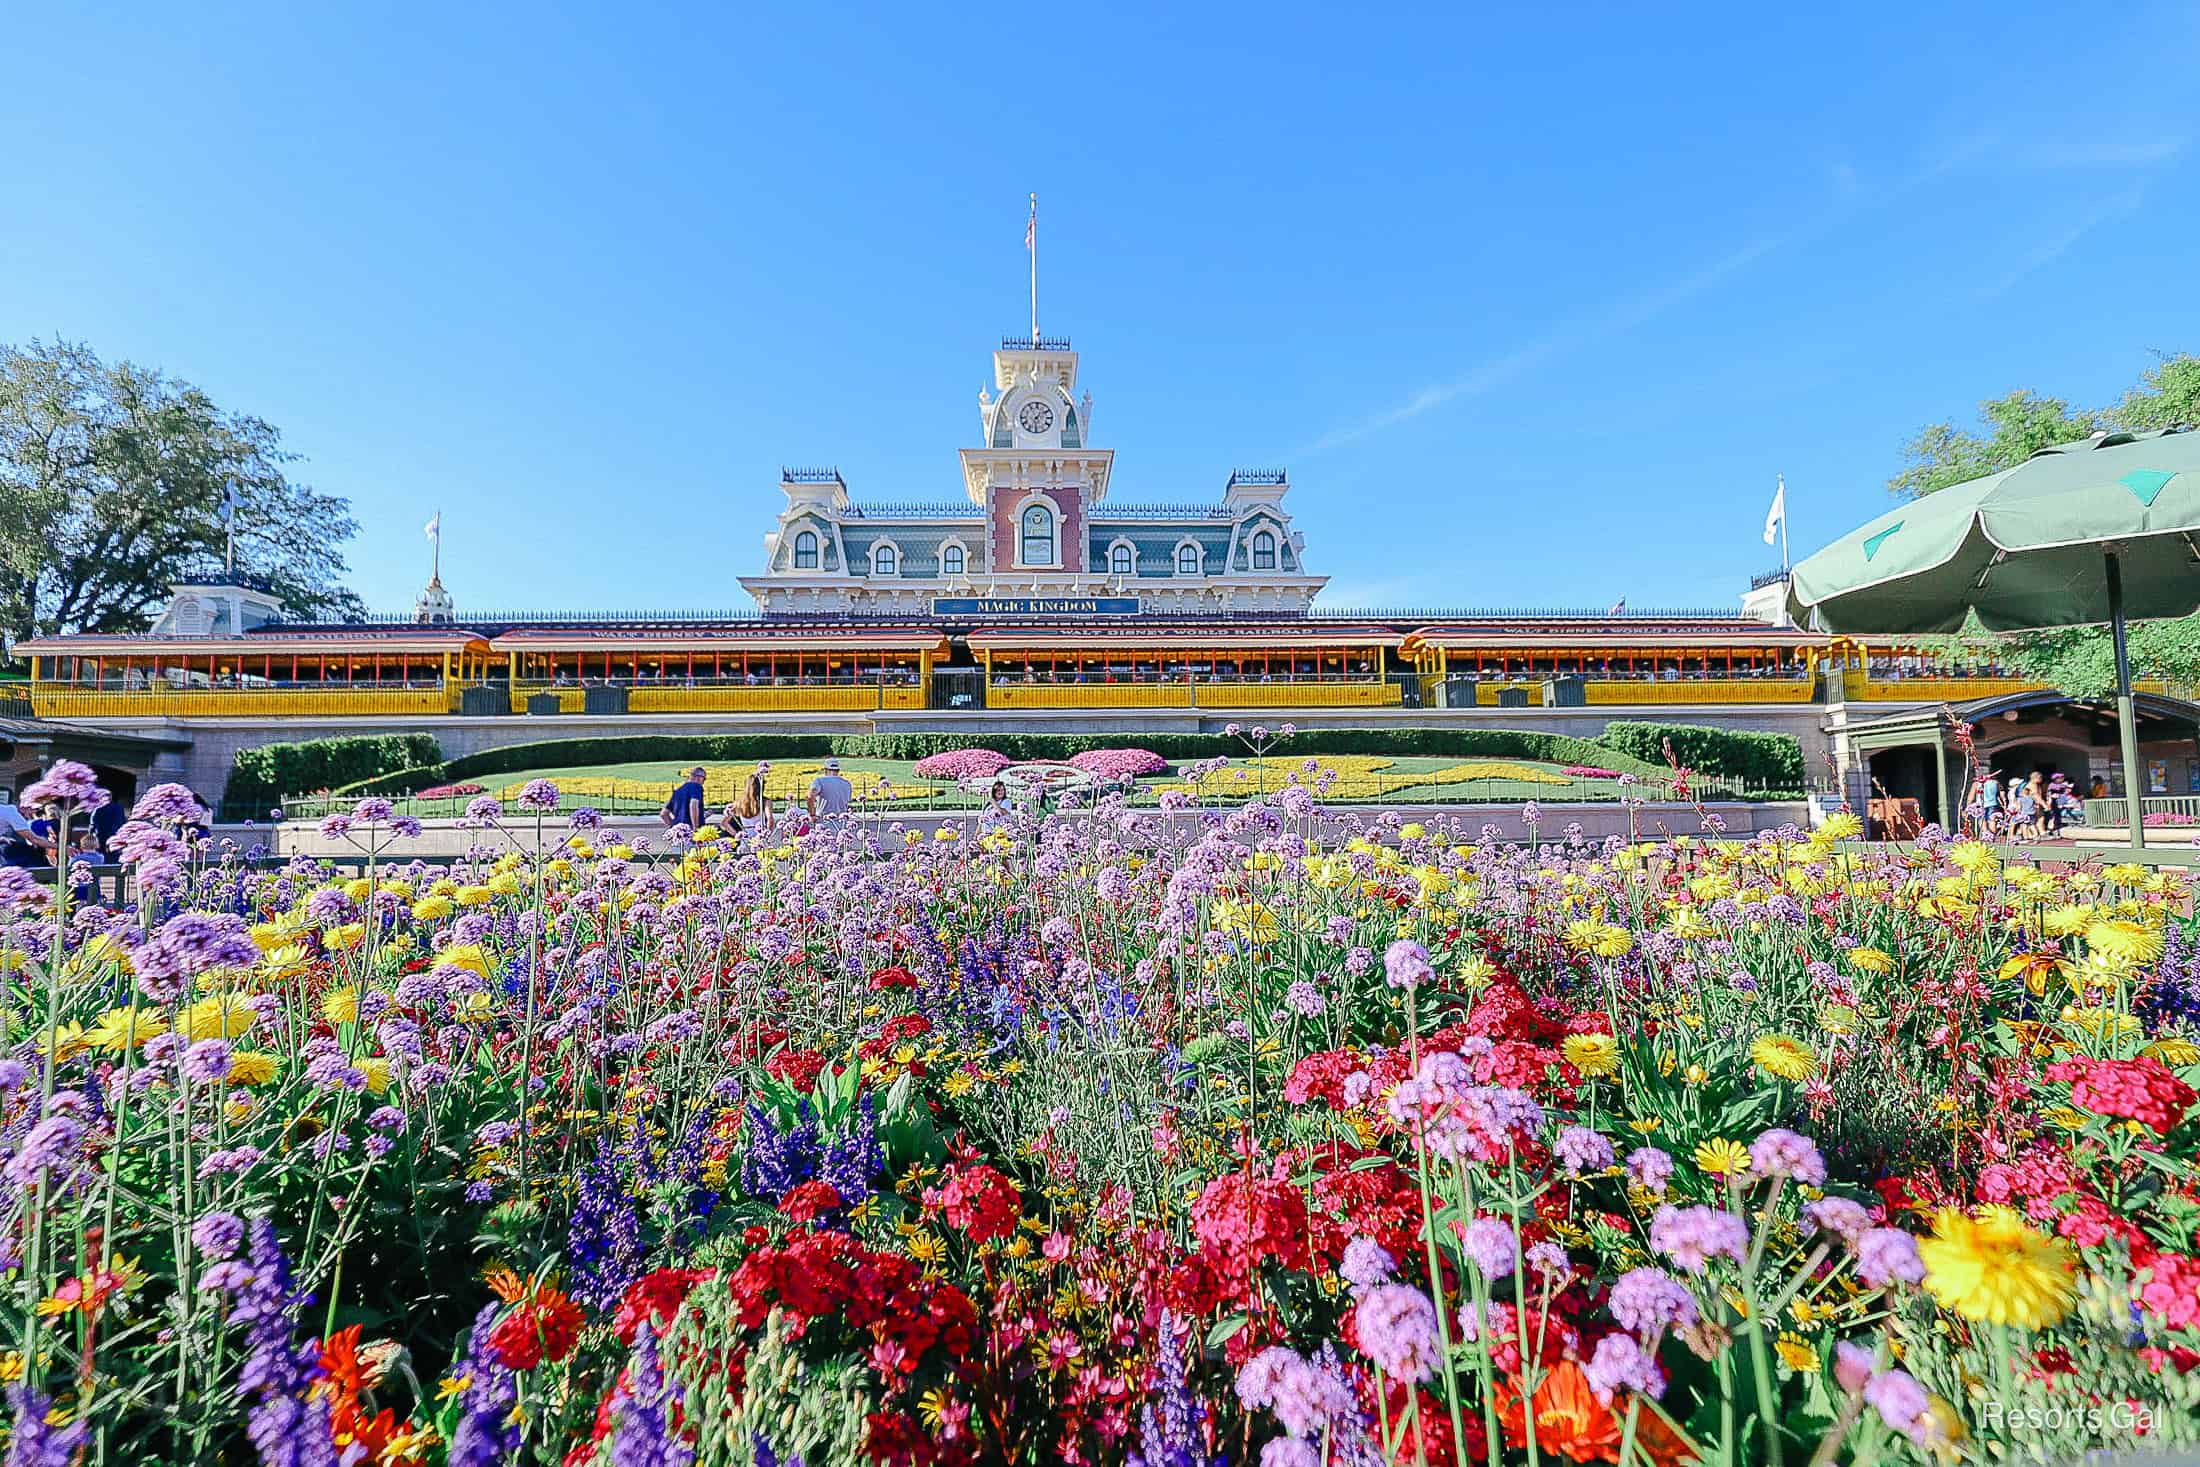 the entrance to Magic Kingdom with the yellow train cars and wildflowers in the Springtime 